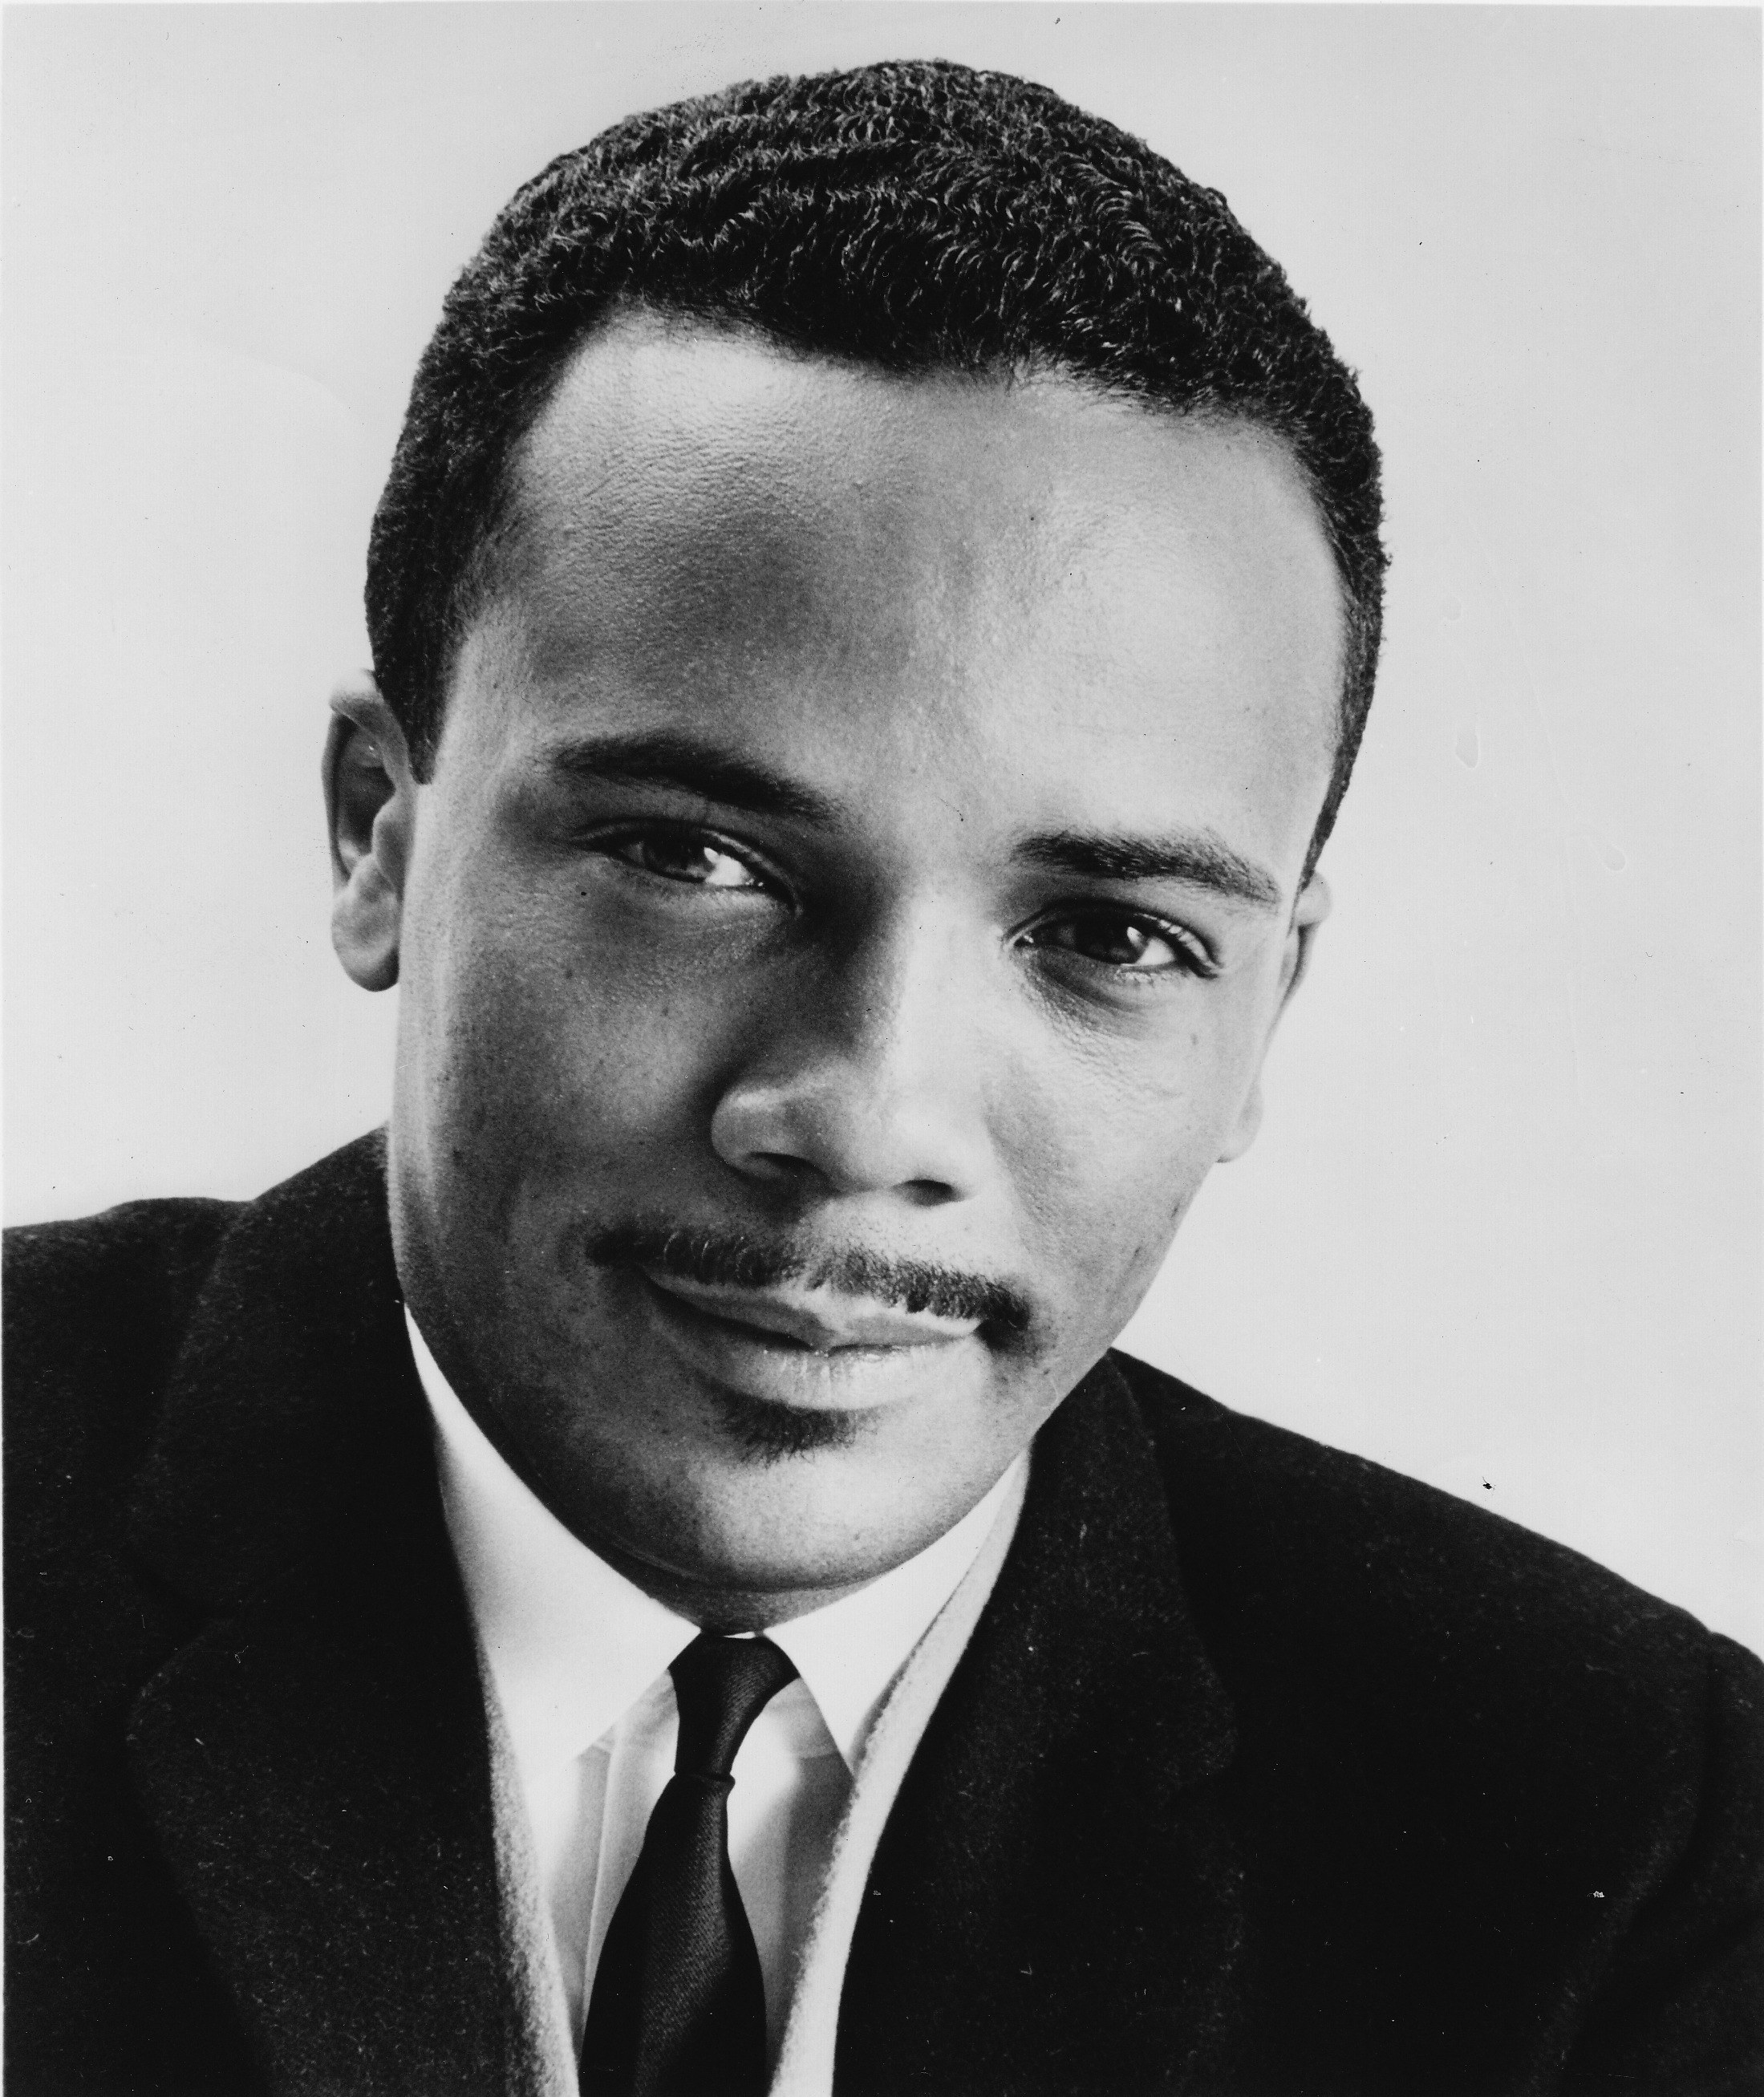 A studio portrait of young Quincy in a suit in 1962